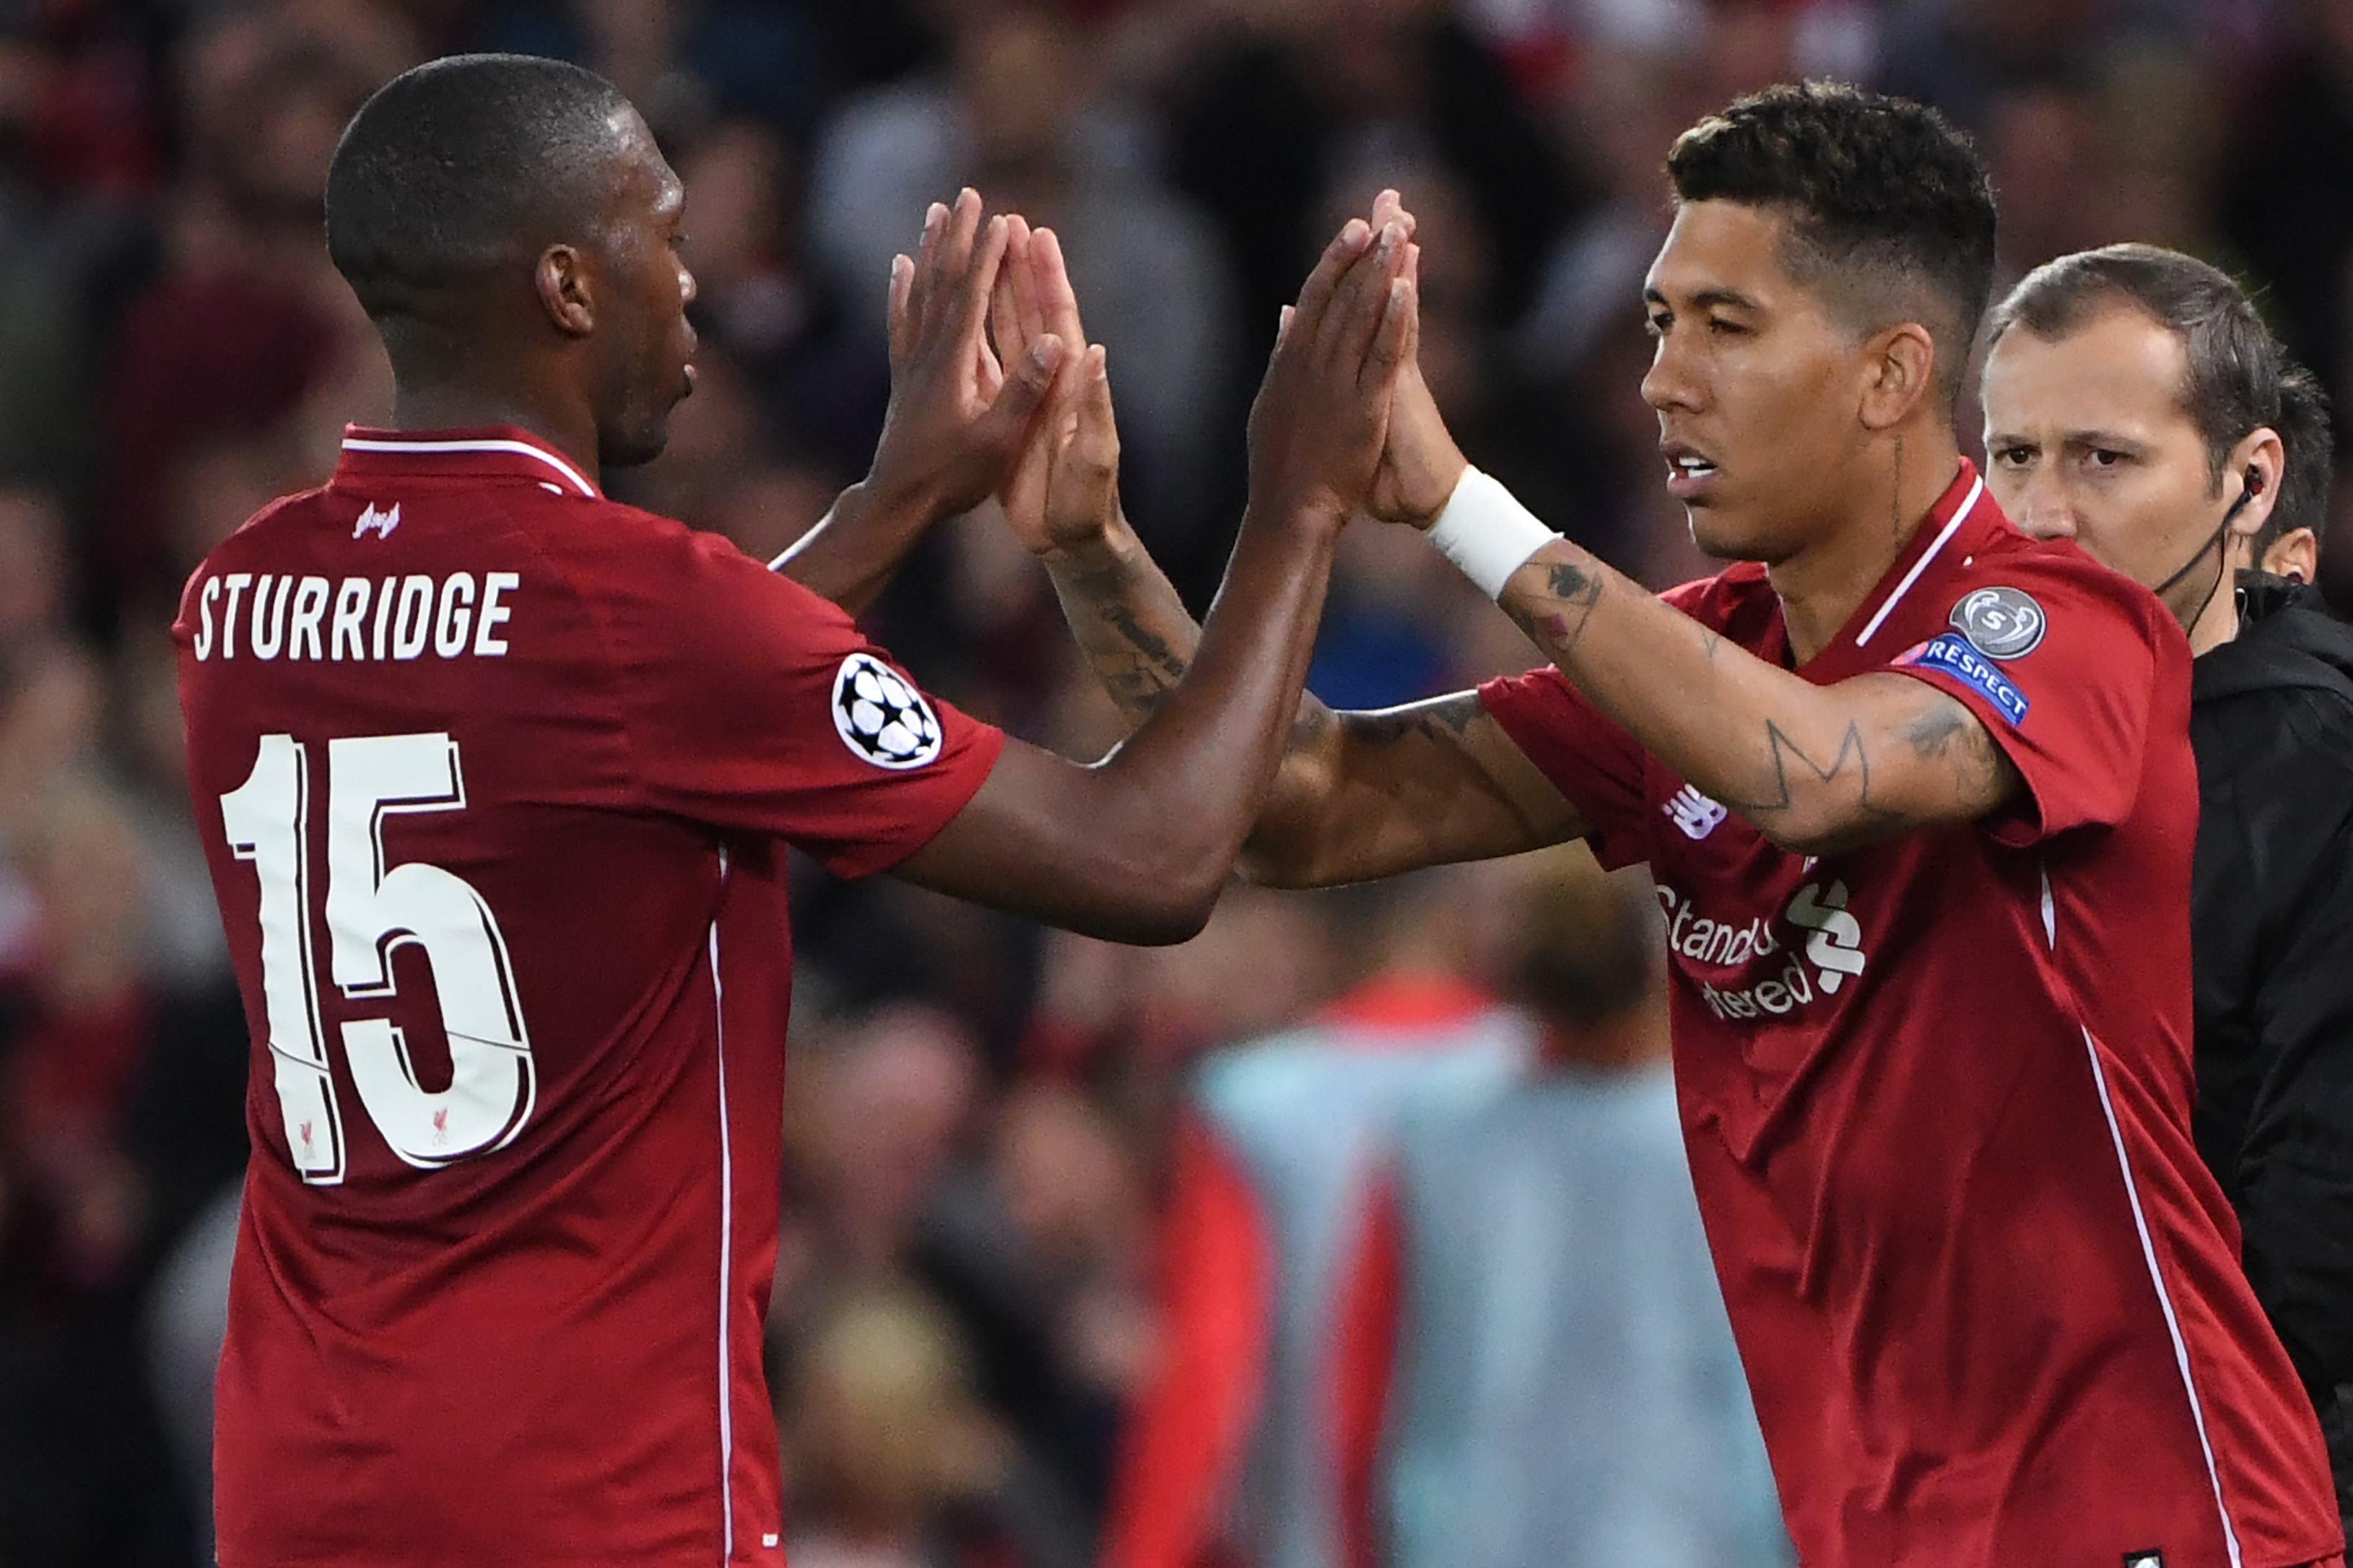 TOPSHOT - Liverpool's Brazilian midfielder Roberto Firmino (R) replaces Liverpool's English striker Daniel Sturridge during the UEFA Champions League group C football match between Liverpool and Paris Saint-Germain at Anfield in Liverpool, north west England on September 18, 2018. (Photo by Paul ELLIS / AFP)        (Photo credit should read PAUL ELLIS/AFP/Getty Images)